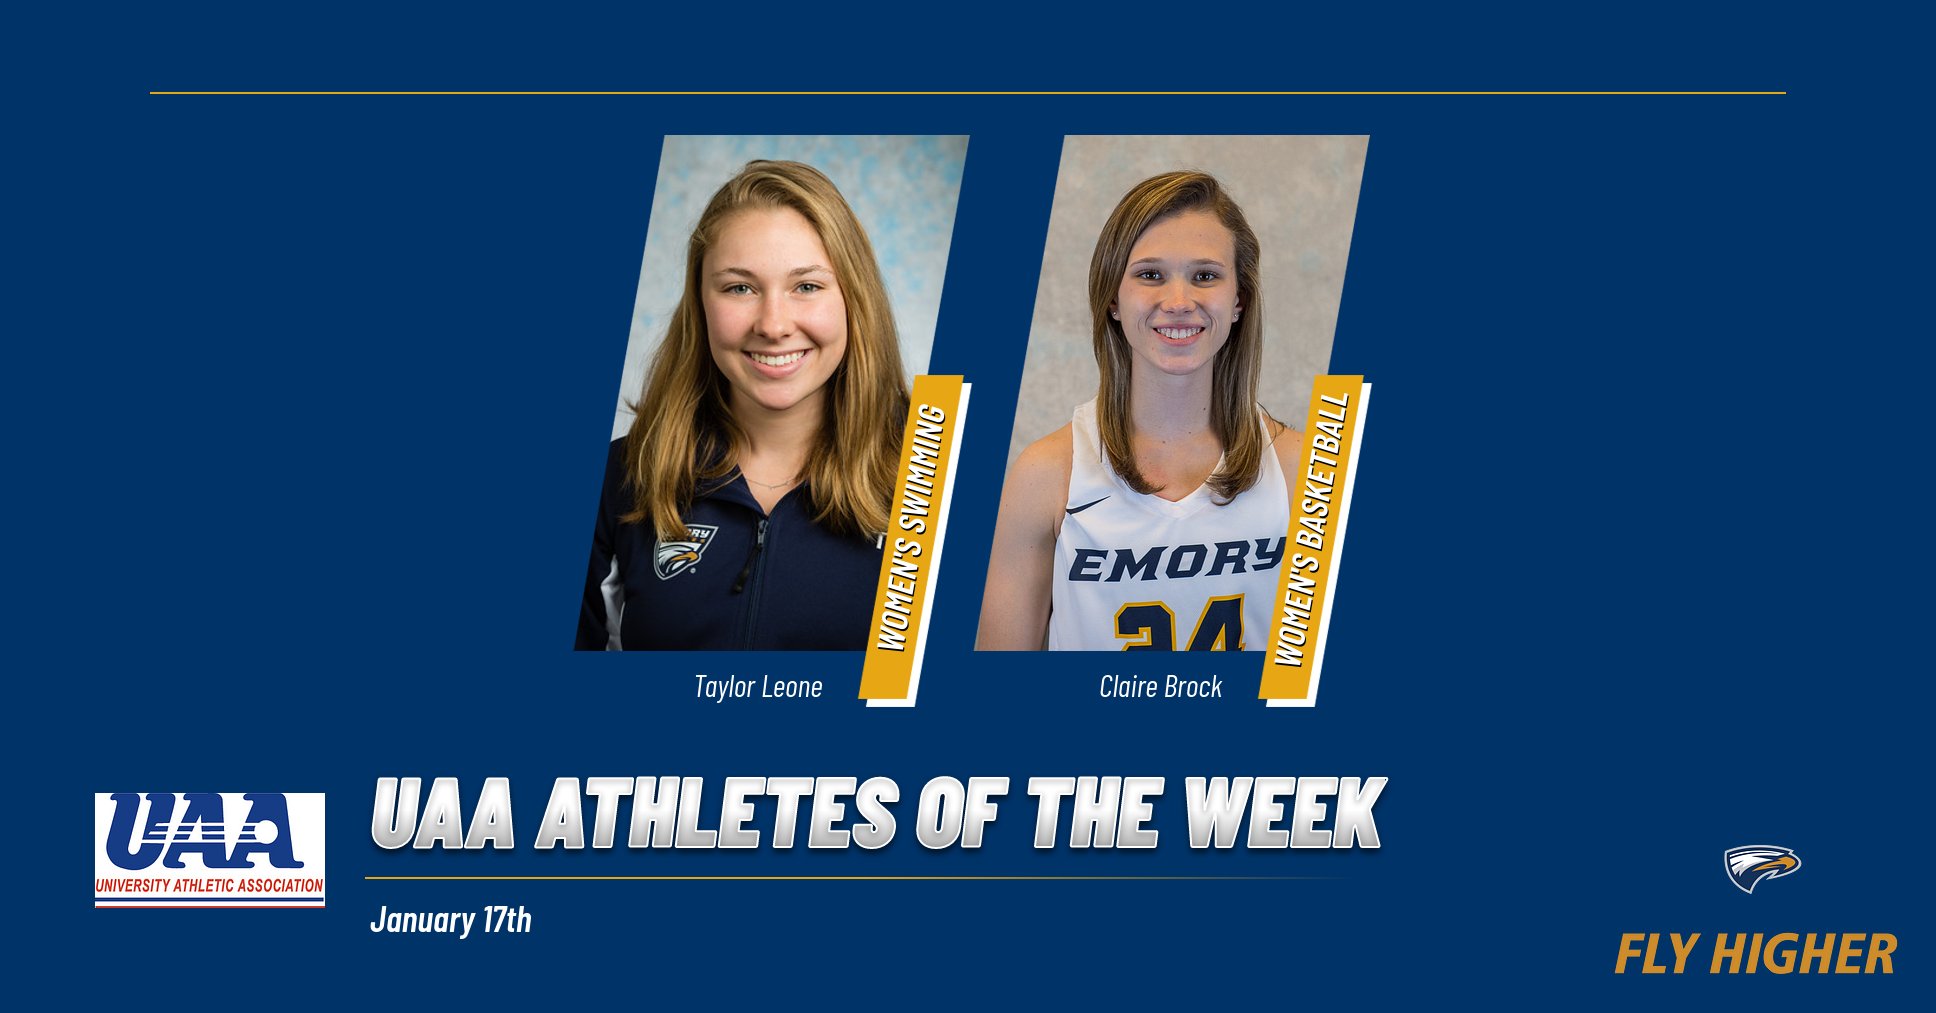 Taylor Leone and Claire Brock Recognized as UAA Athletes of the Week